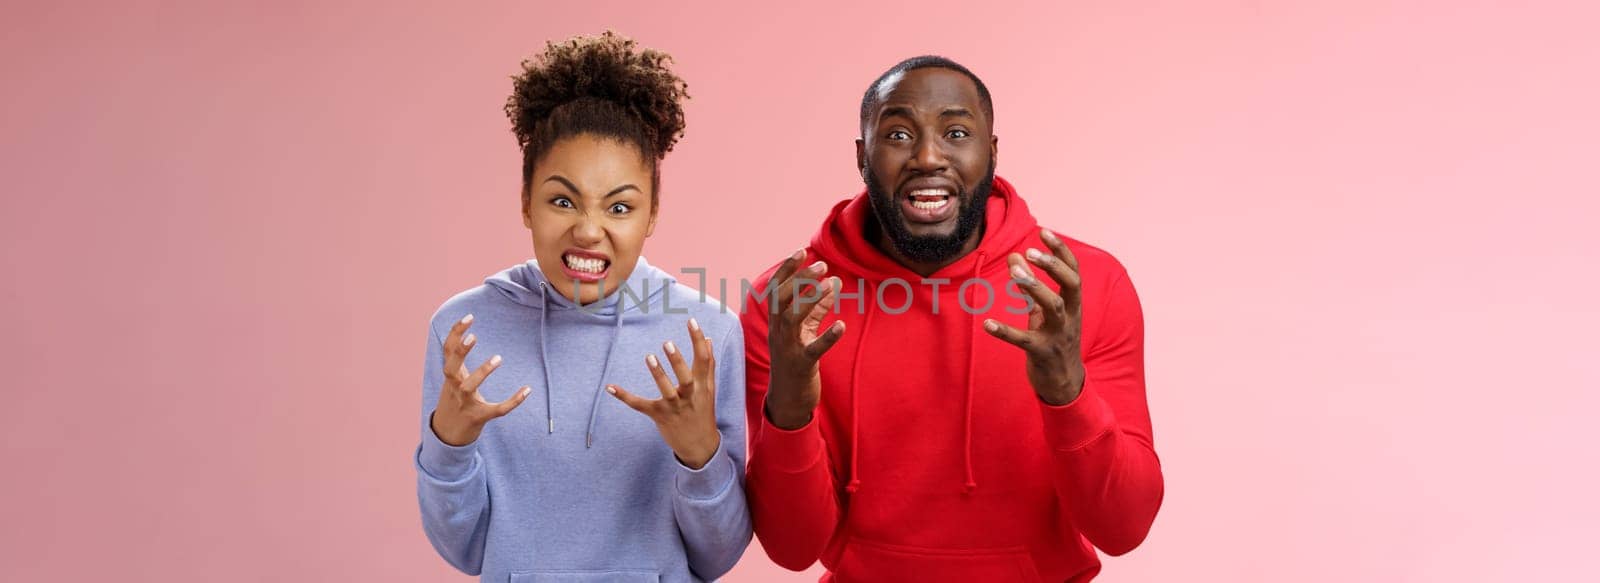 Two siblings upset failure losing bet watching football match cringing sorrow reckless, raising hands dismay sadness express regret anger being disappointed, standing pink background distressed.